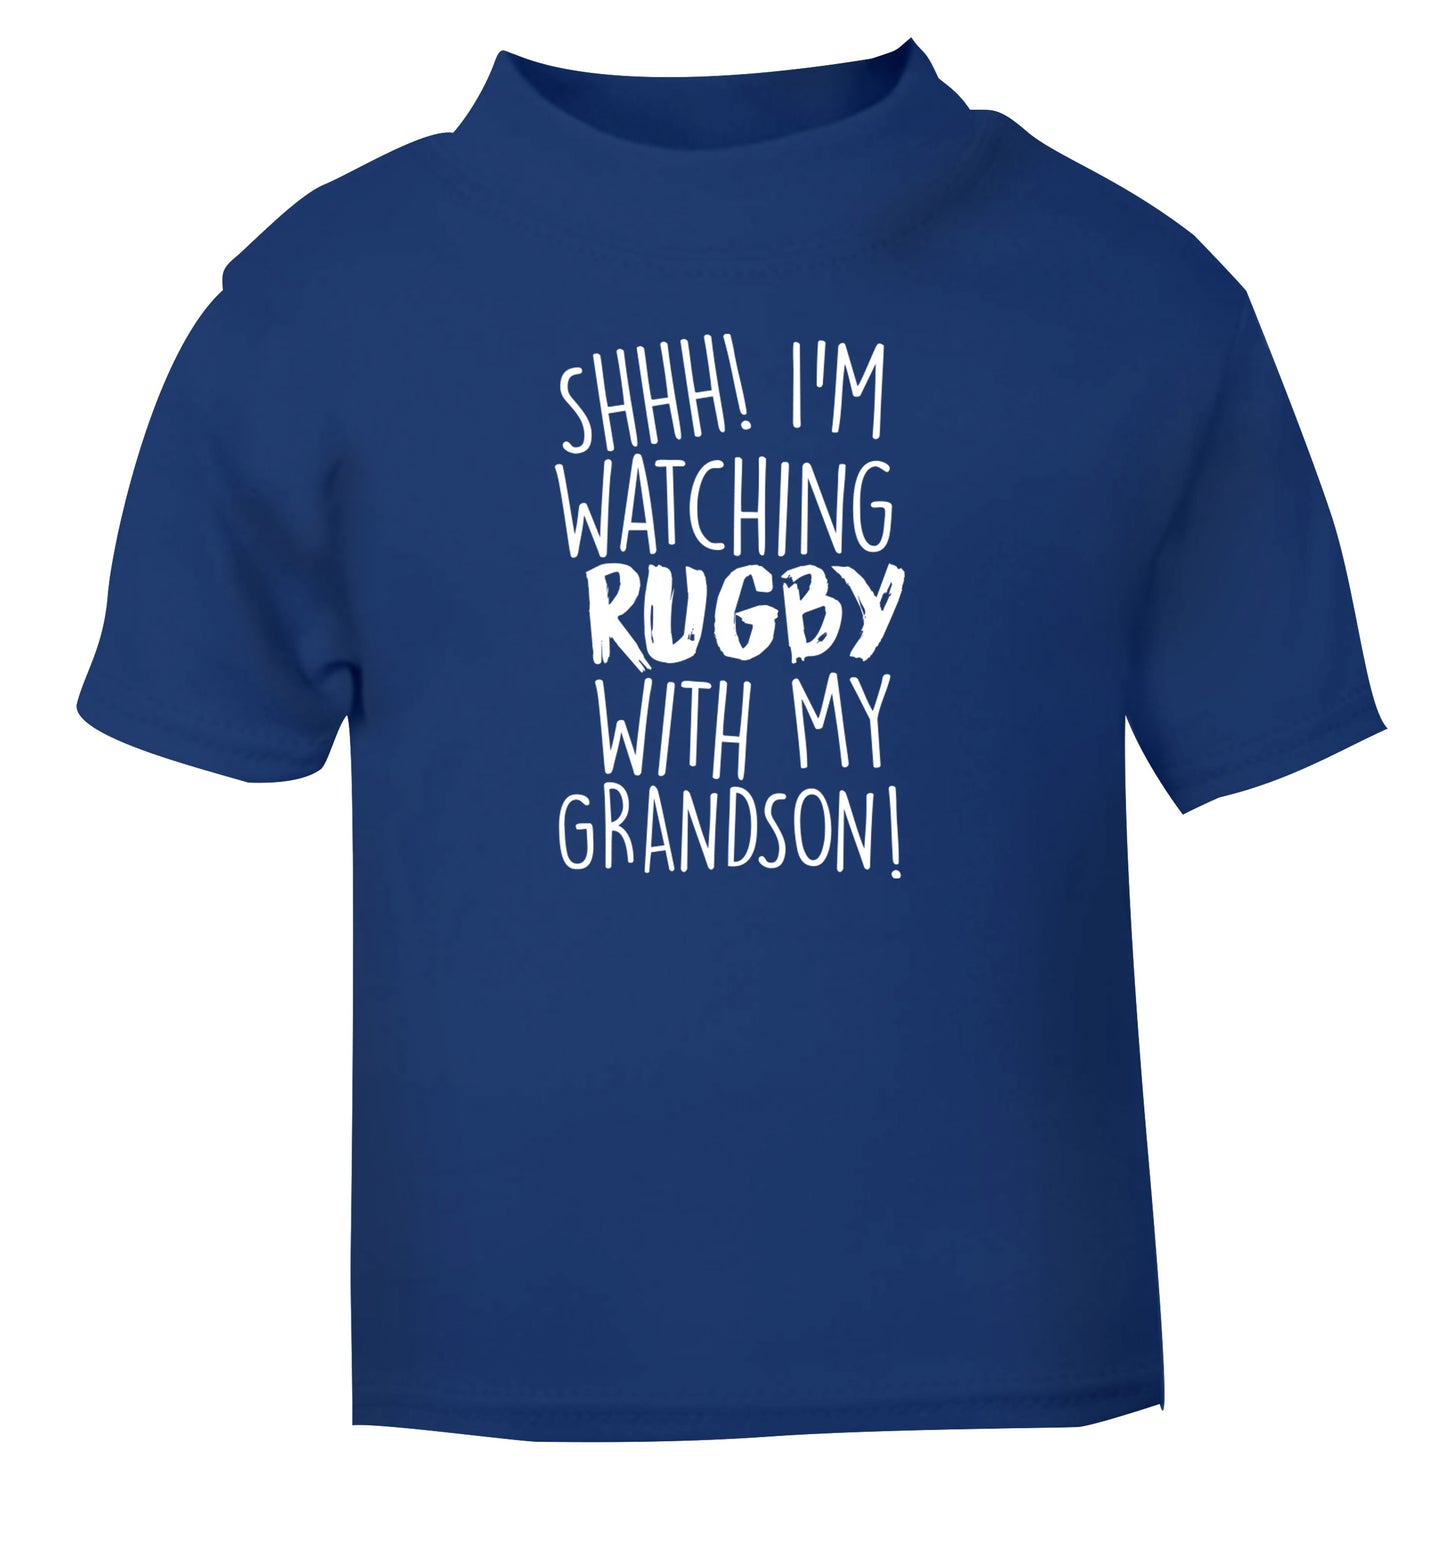 Shh I'm watching rugby with my grandson blue Baby Toddler Tshirt 2 Years